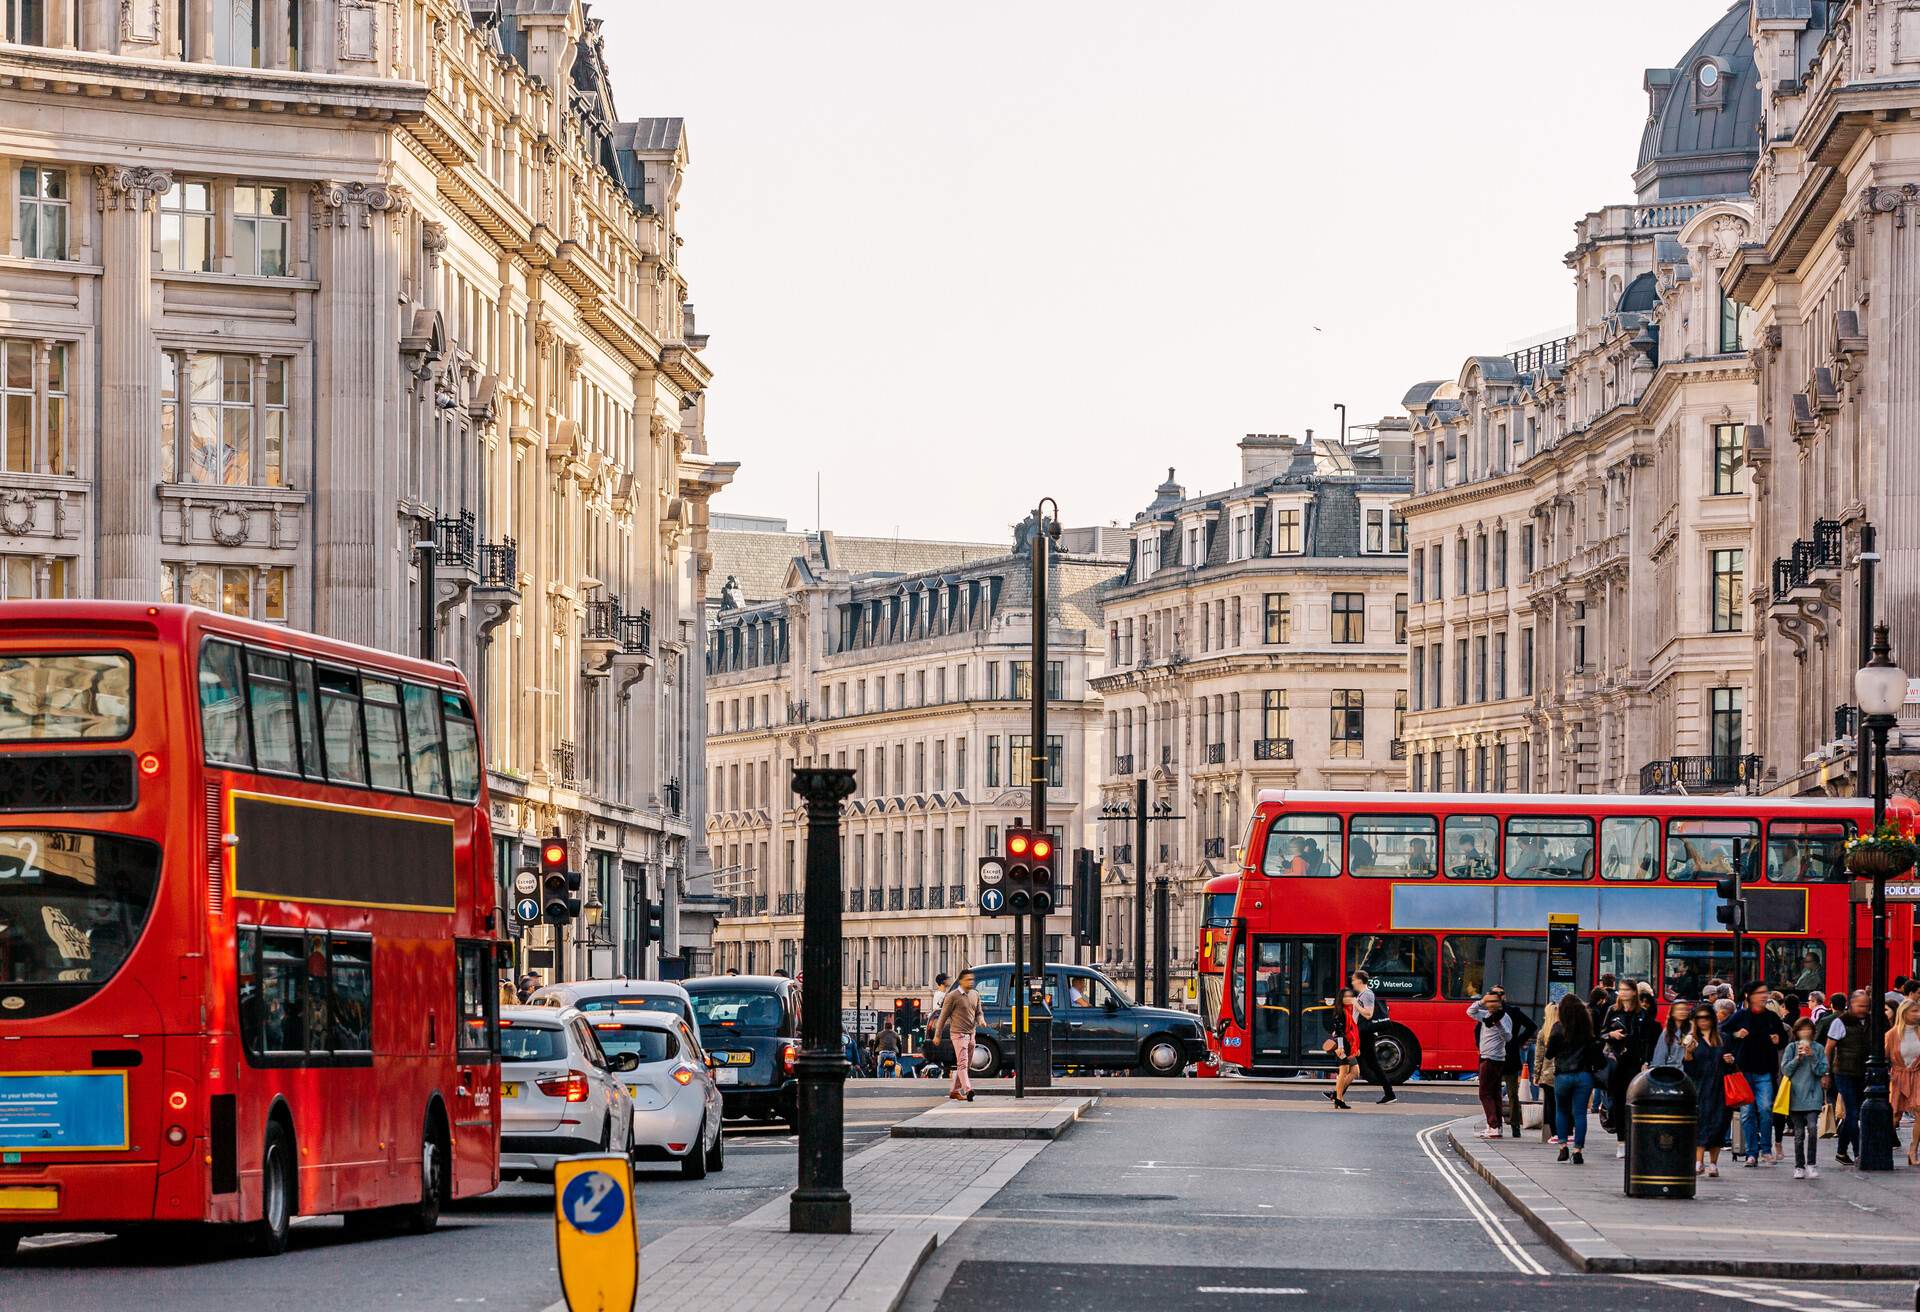 Regent Street and Oxford Street intersection in London, UK